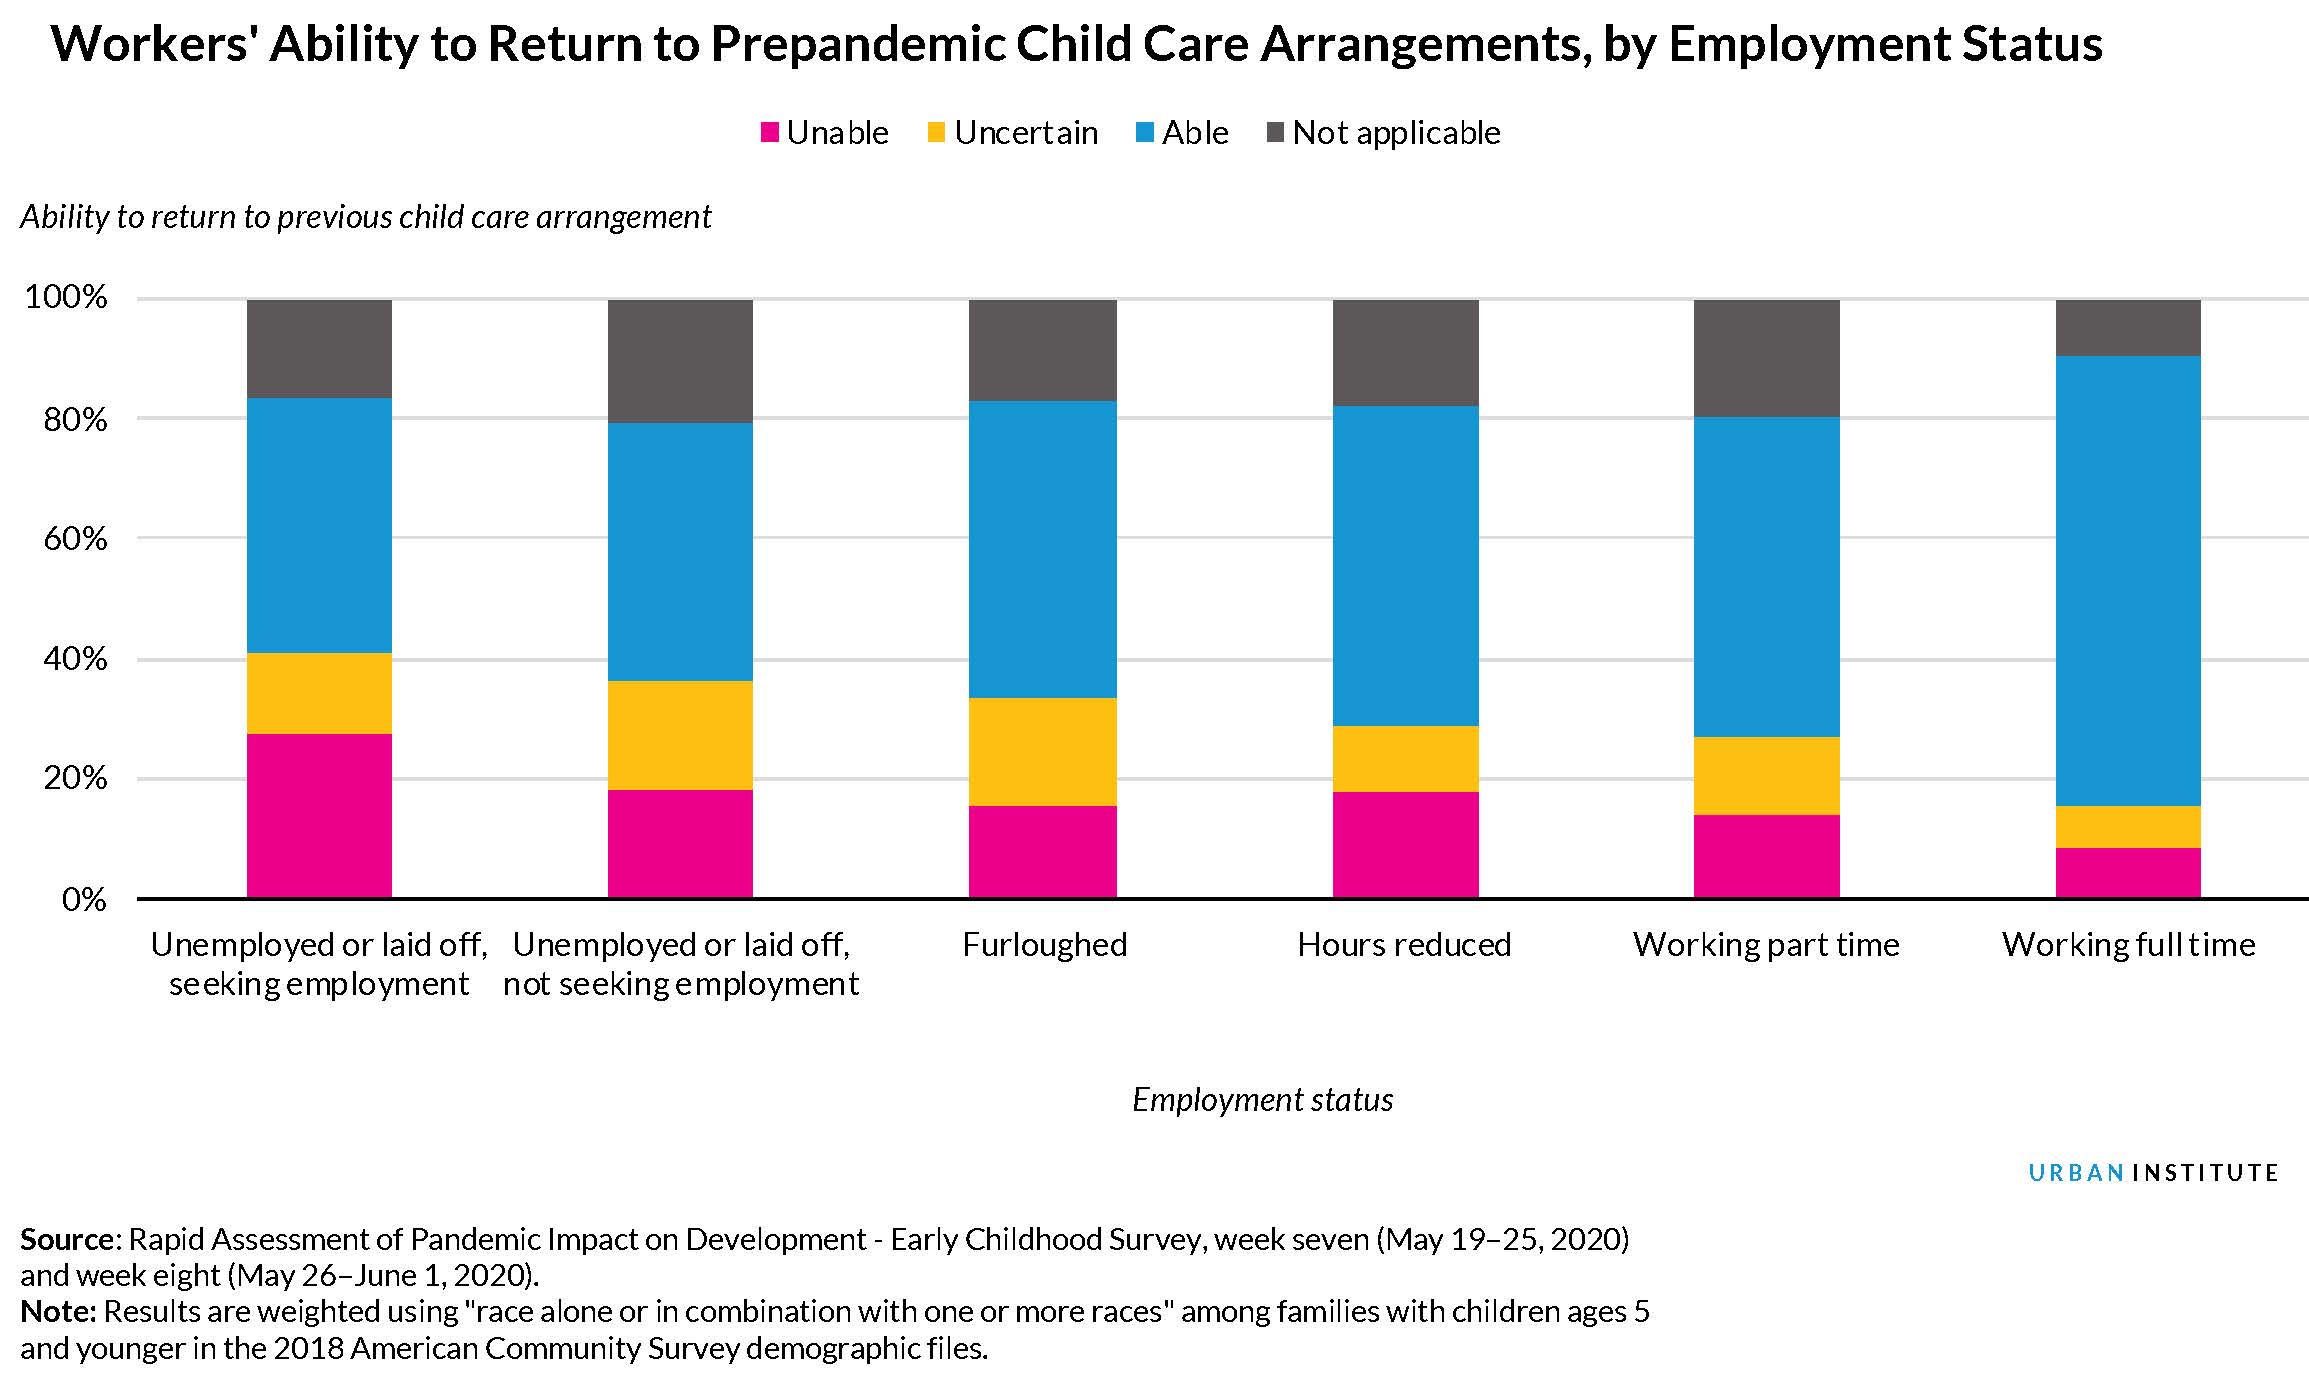 Workers' ability to return to prepandemic child care arrangements